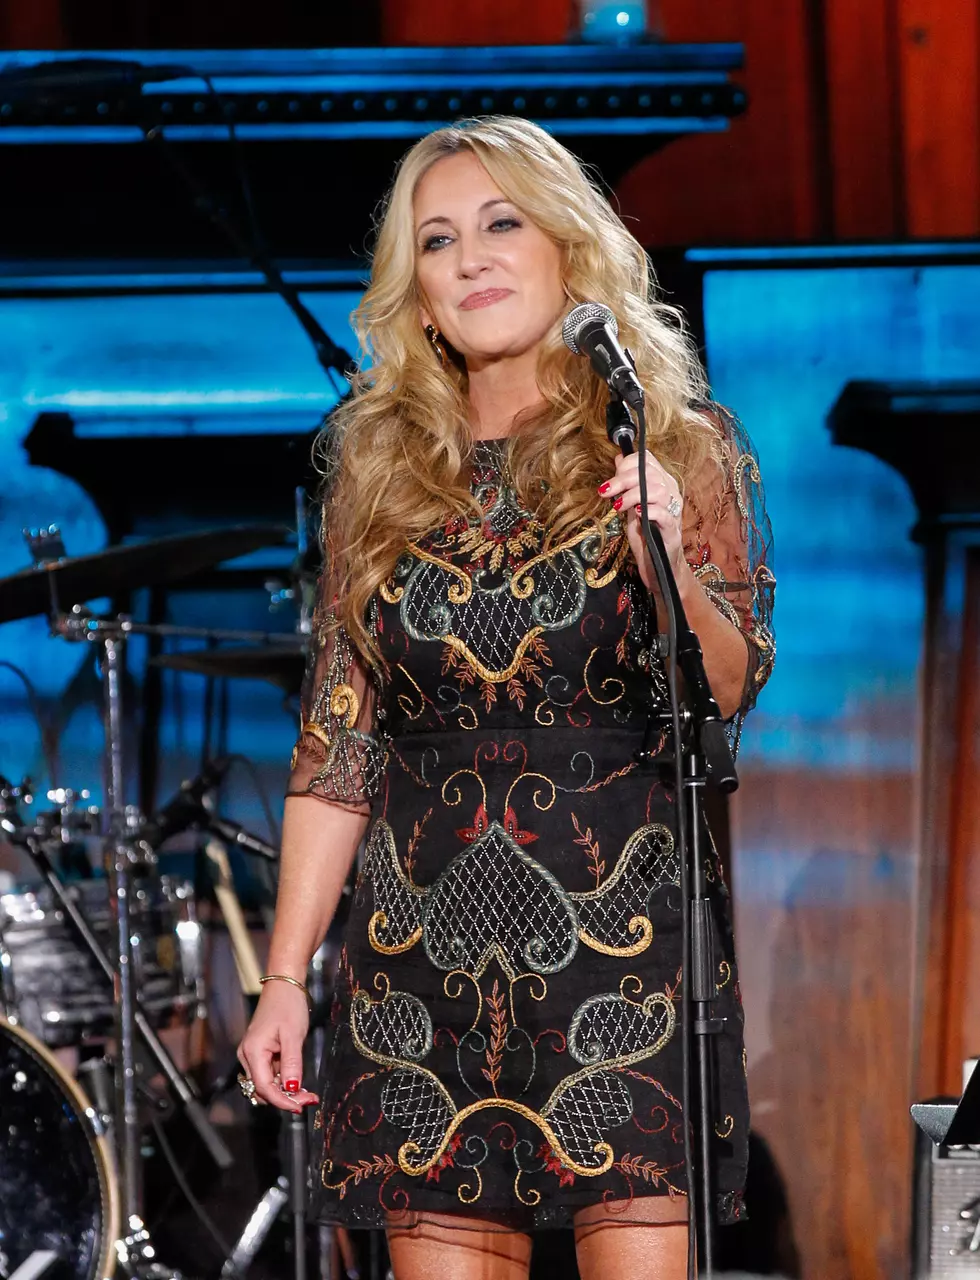 Lee Ann Womack Tells it Like it is Backstage at the Grammys